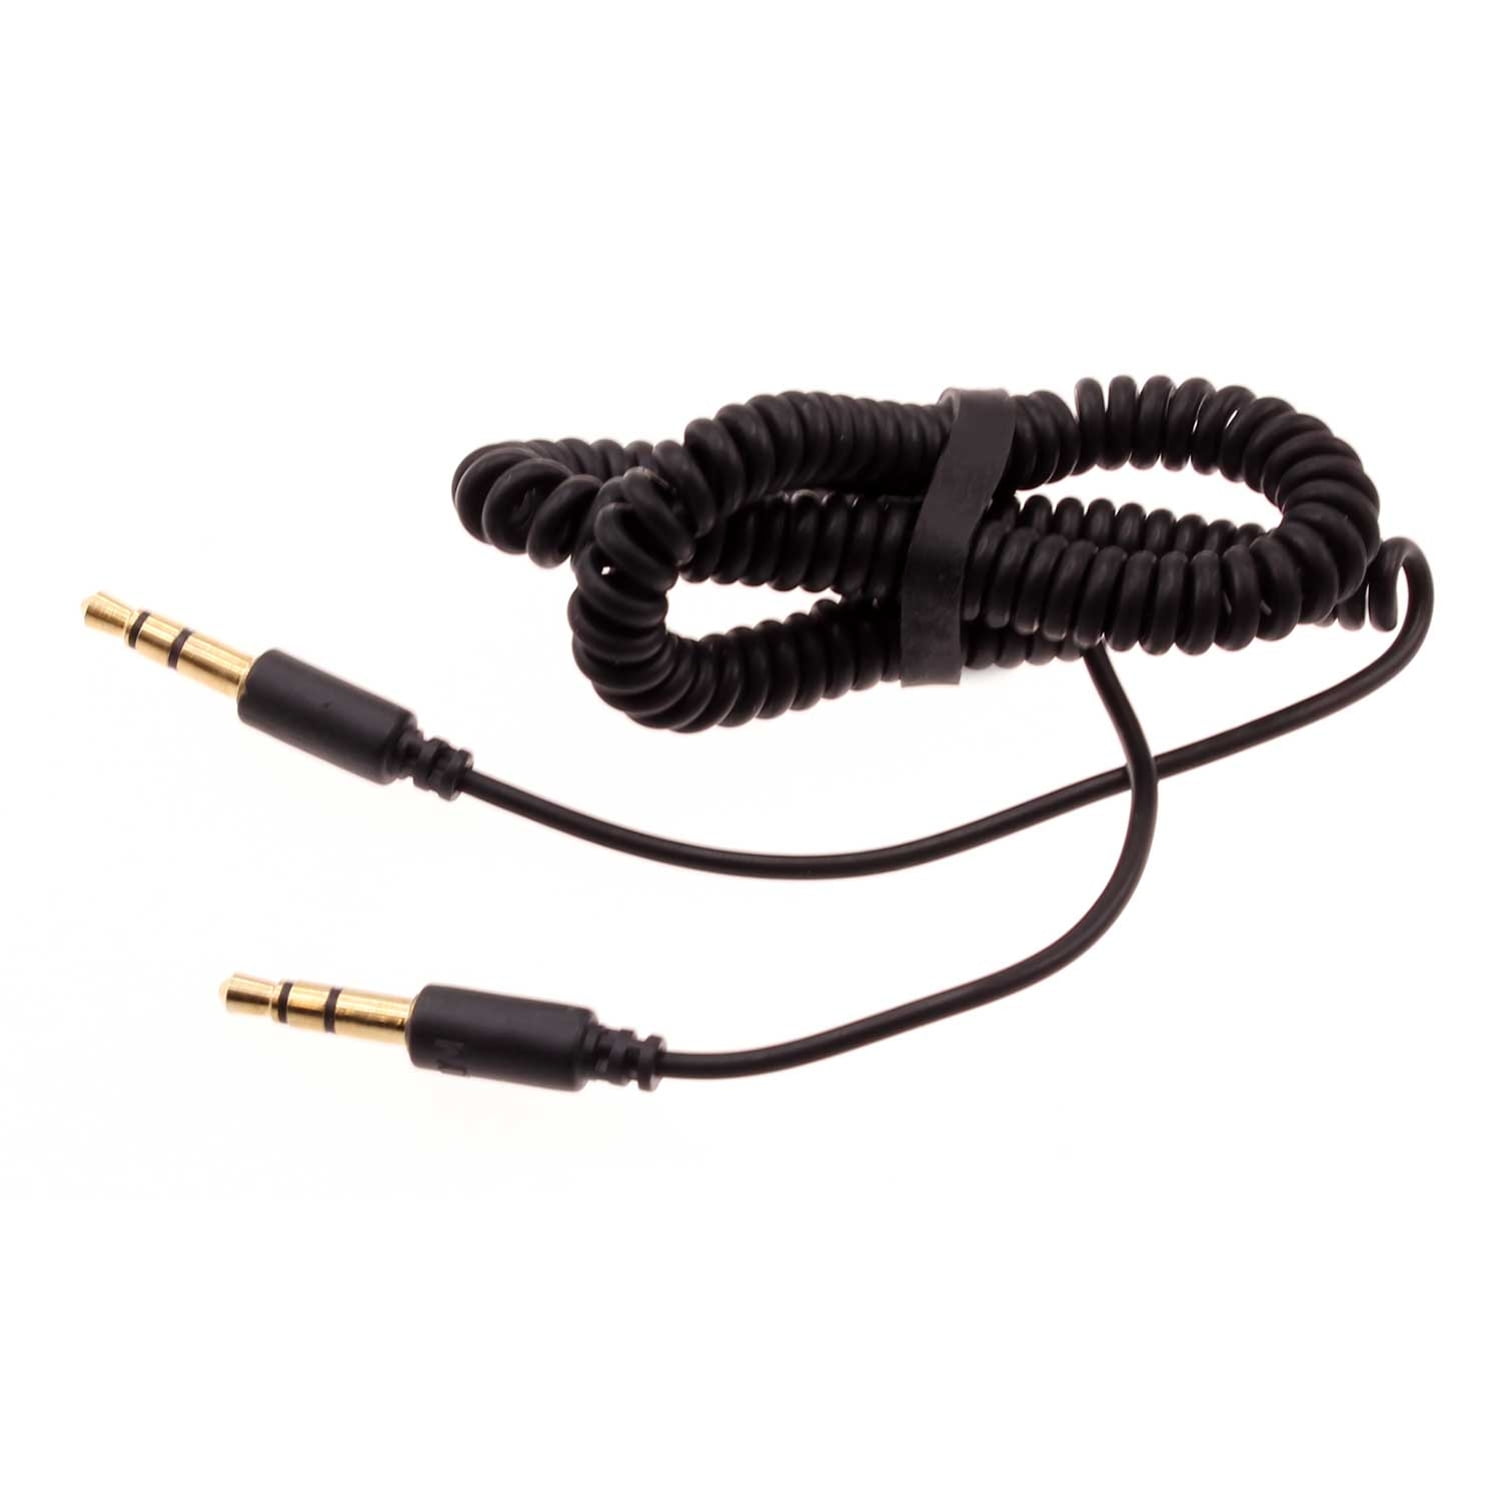 TABLETS BLACK COILED AUX CABLE CAR STEREO WIRE AUDIO SPEAKER CORD for PHONE 